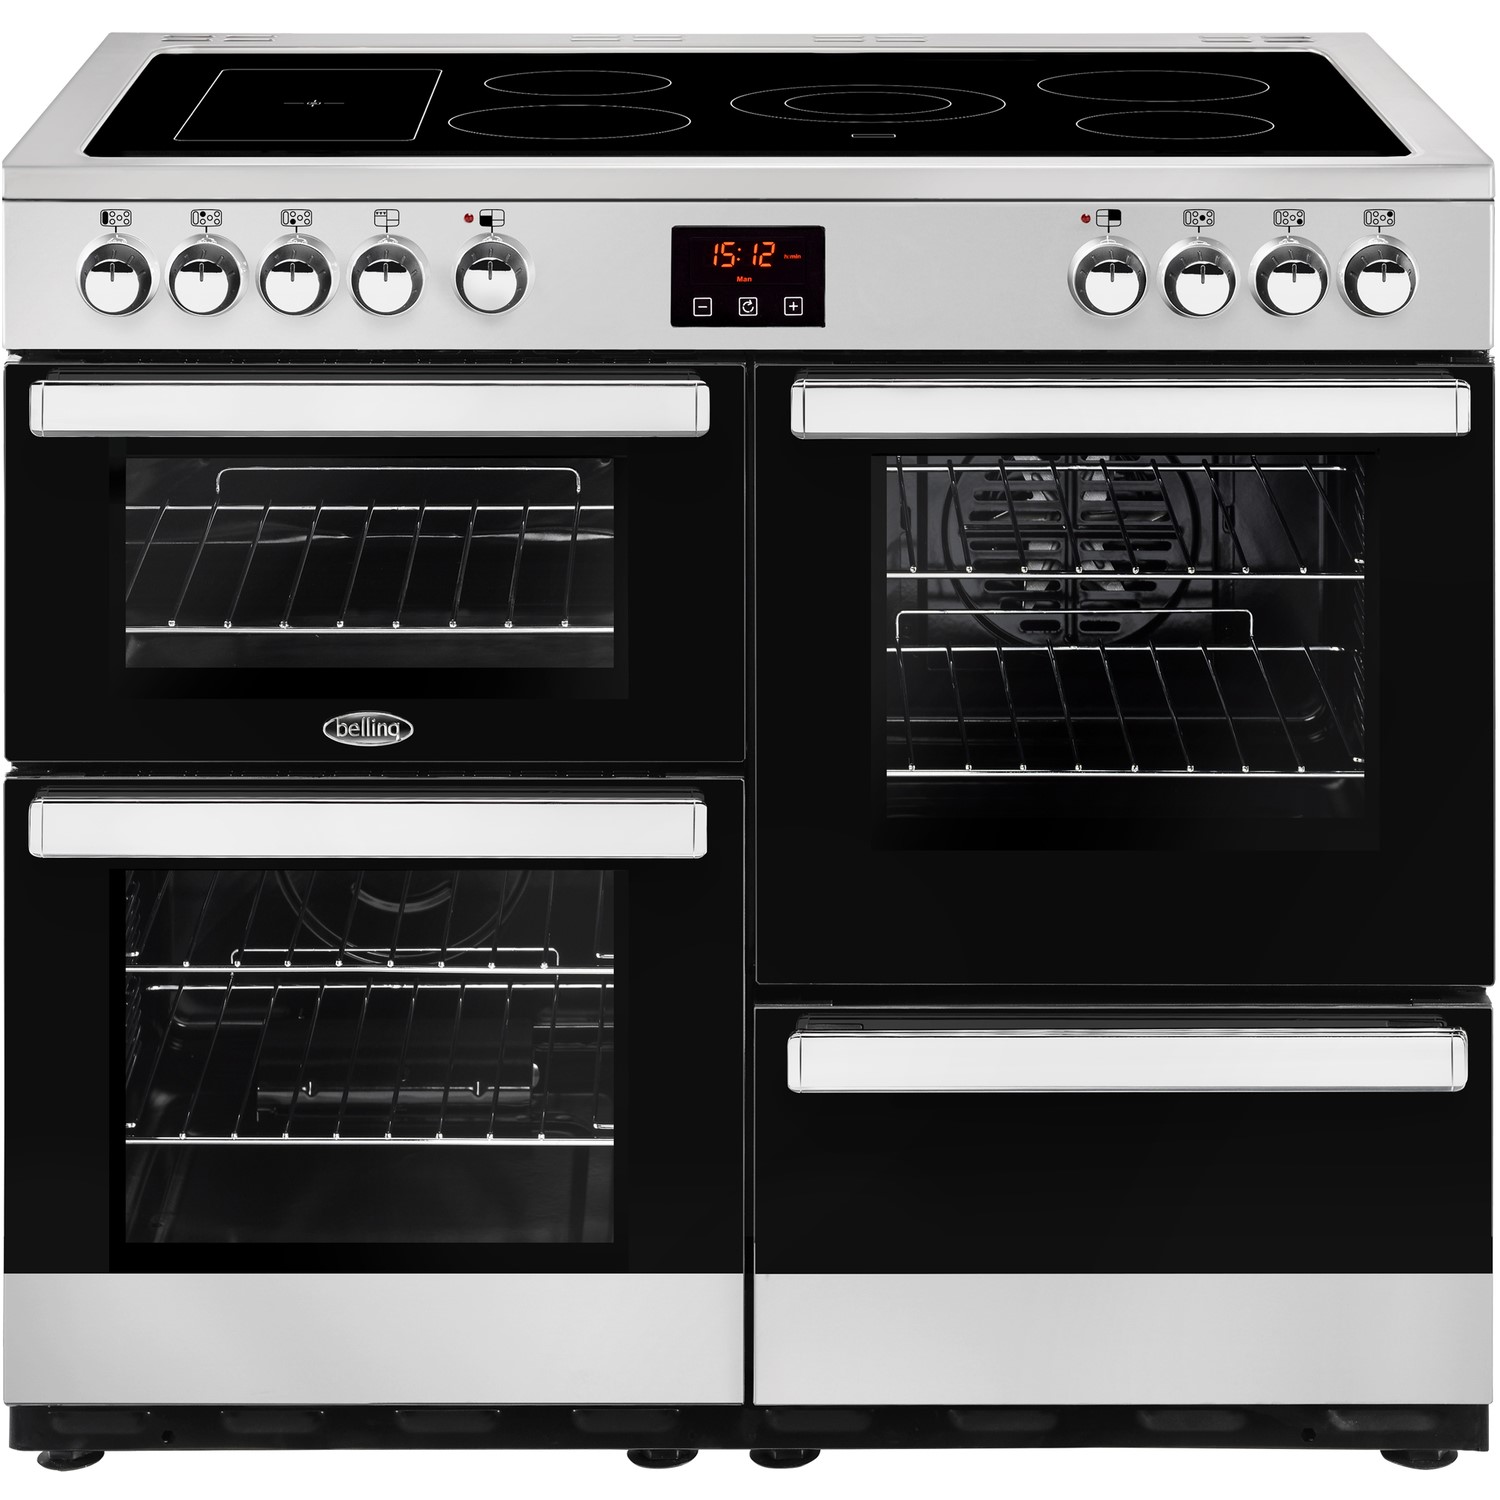 Refurbished Belling Cookcentre 100E 100cm Electric Range Cooker with Ceramic Hob Stainless Steel